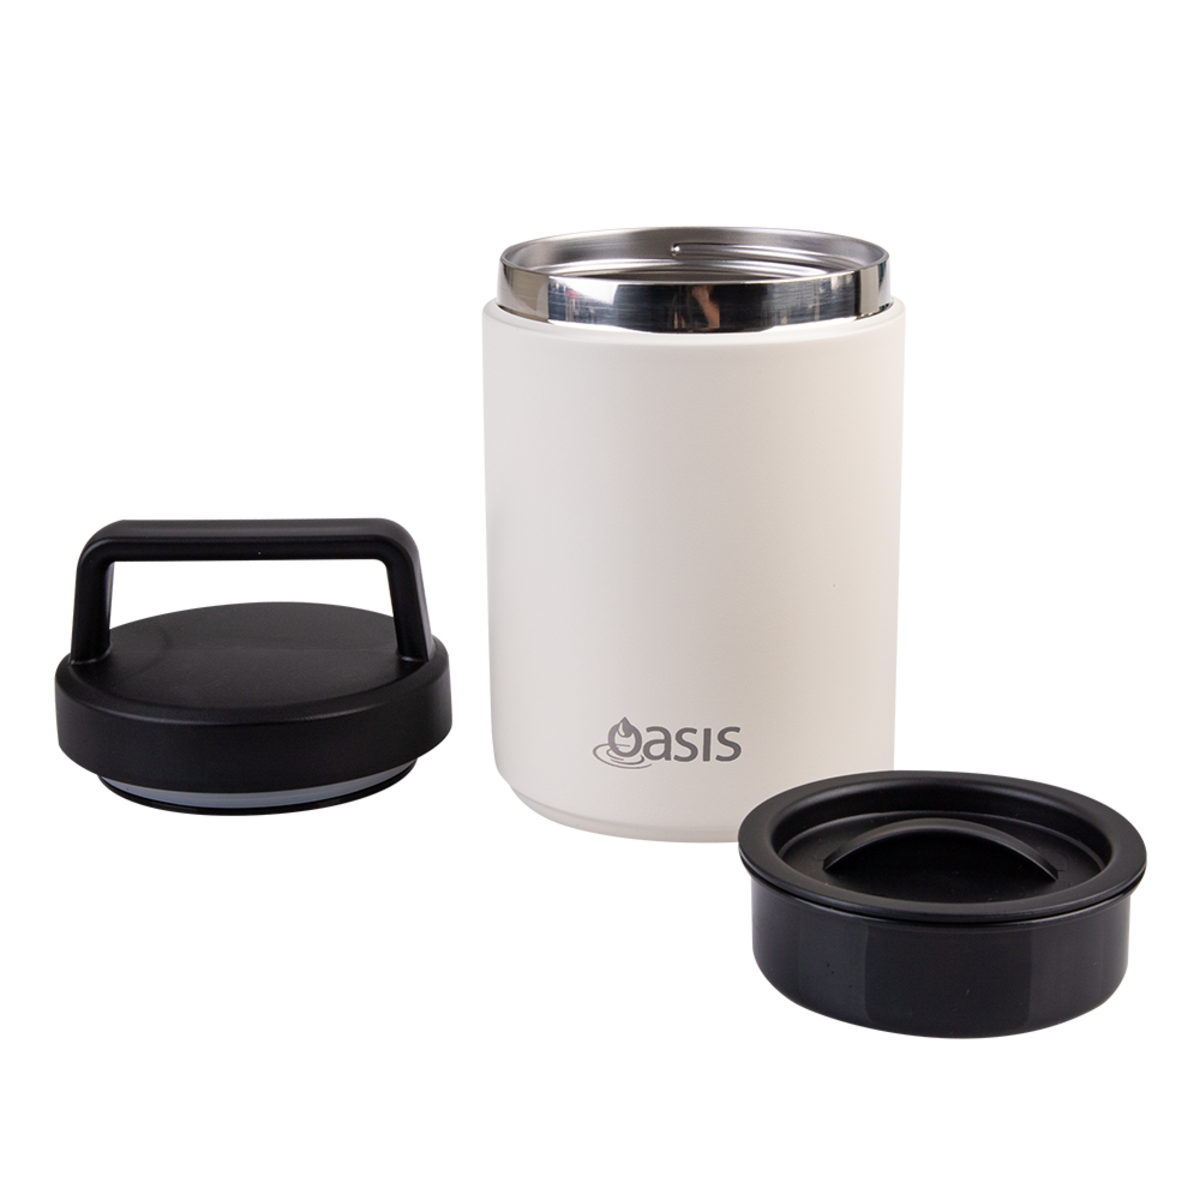 OASIS STAINLESS STEEL DOUBLE WALL INSULATED FOOD FLASK W/ HANDLE 480ML - ALABASTER